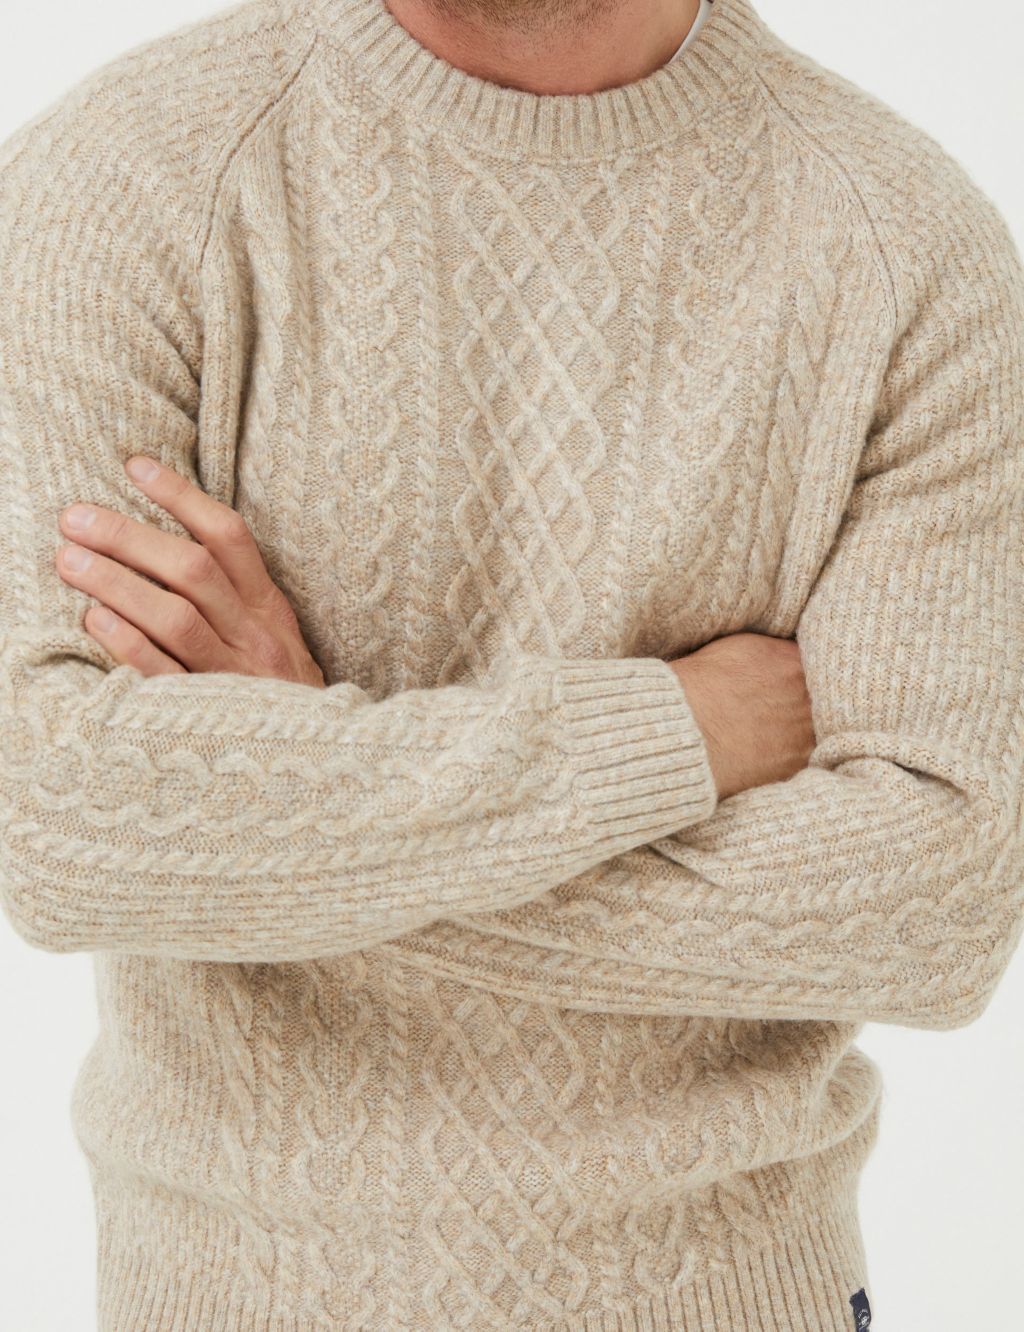 Cable Crew Neck Jumper image 3